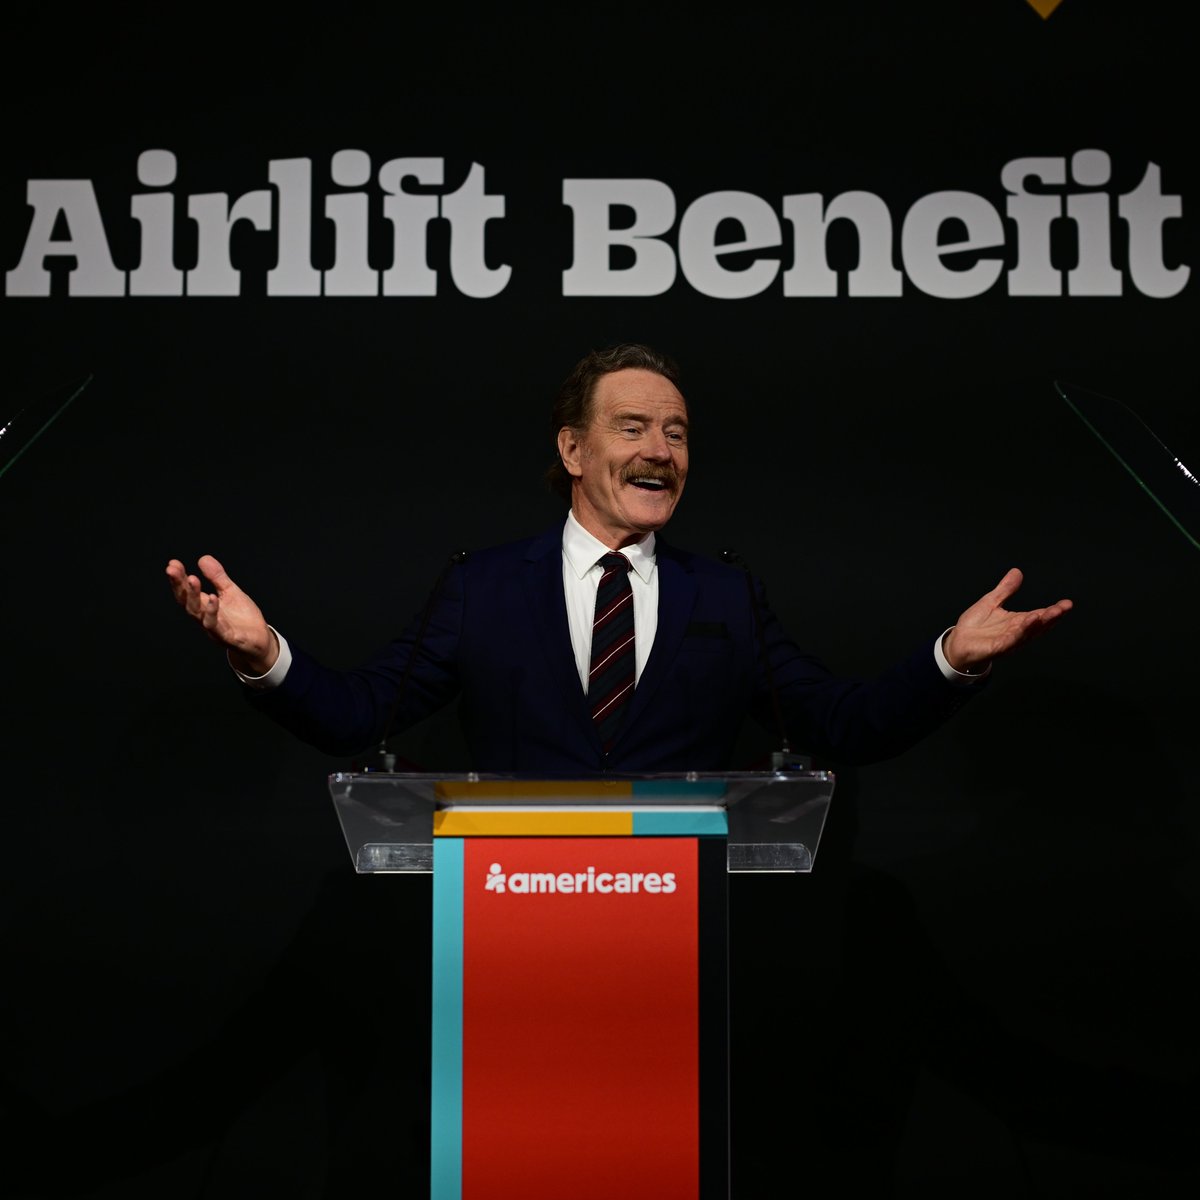 Last night's Airlift Benefit was filled with laughs, music and inspiring stories from around the world as we celebrated 45 years of life-saving work. Our host, actor and producer @BryanCranston, led us on an unforgettable journey highlighting the work #Americares has done in…